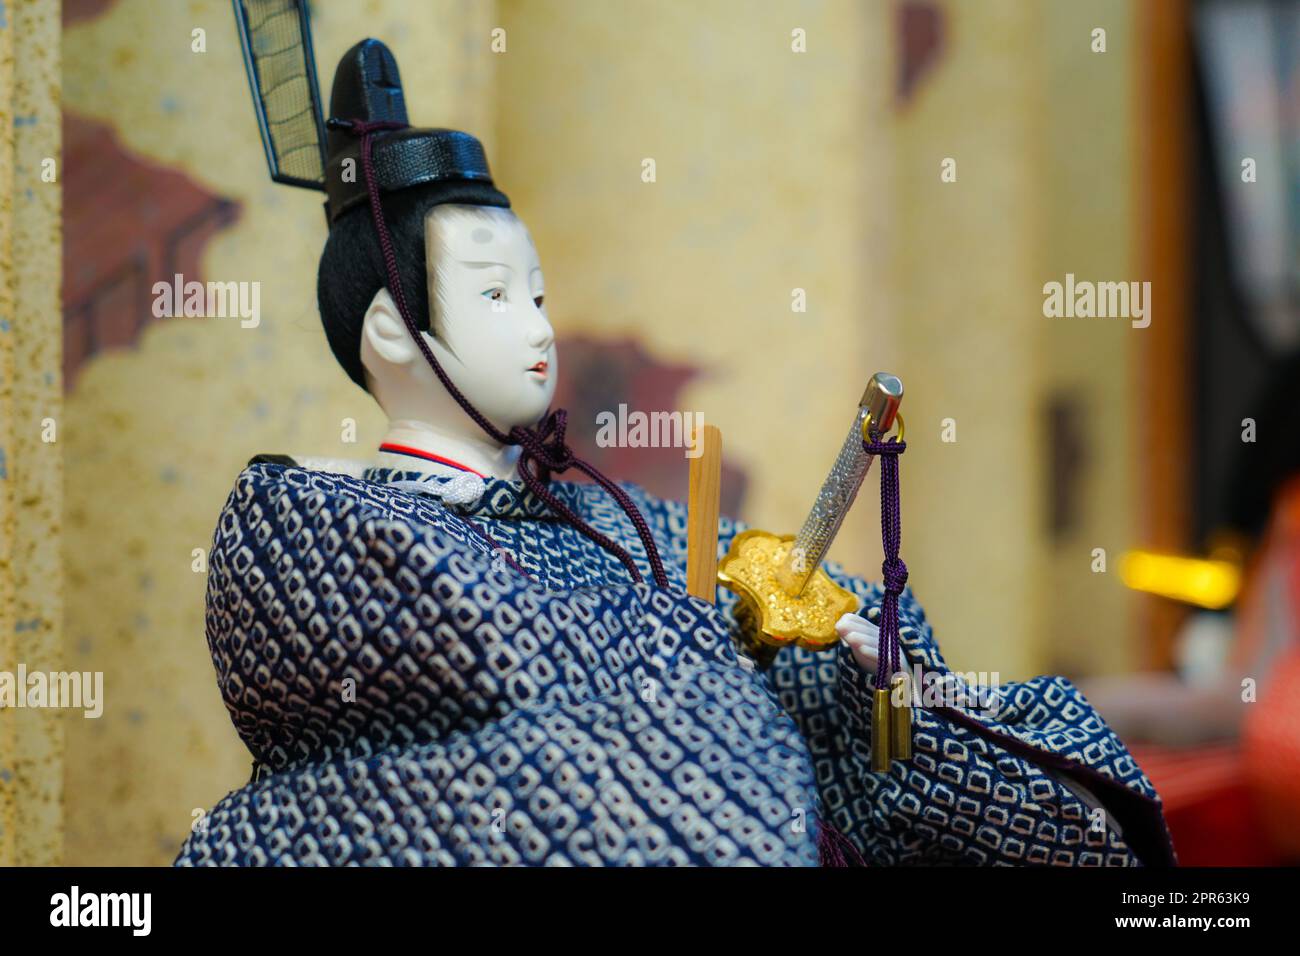 Doll Festival of tiers (Japanese culture) Stock Photo